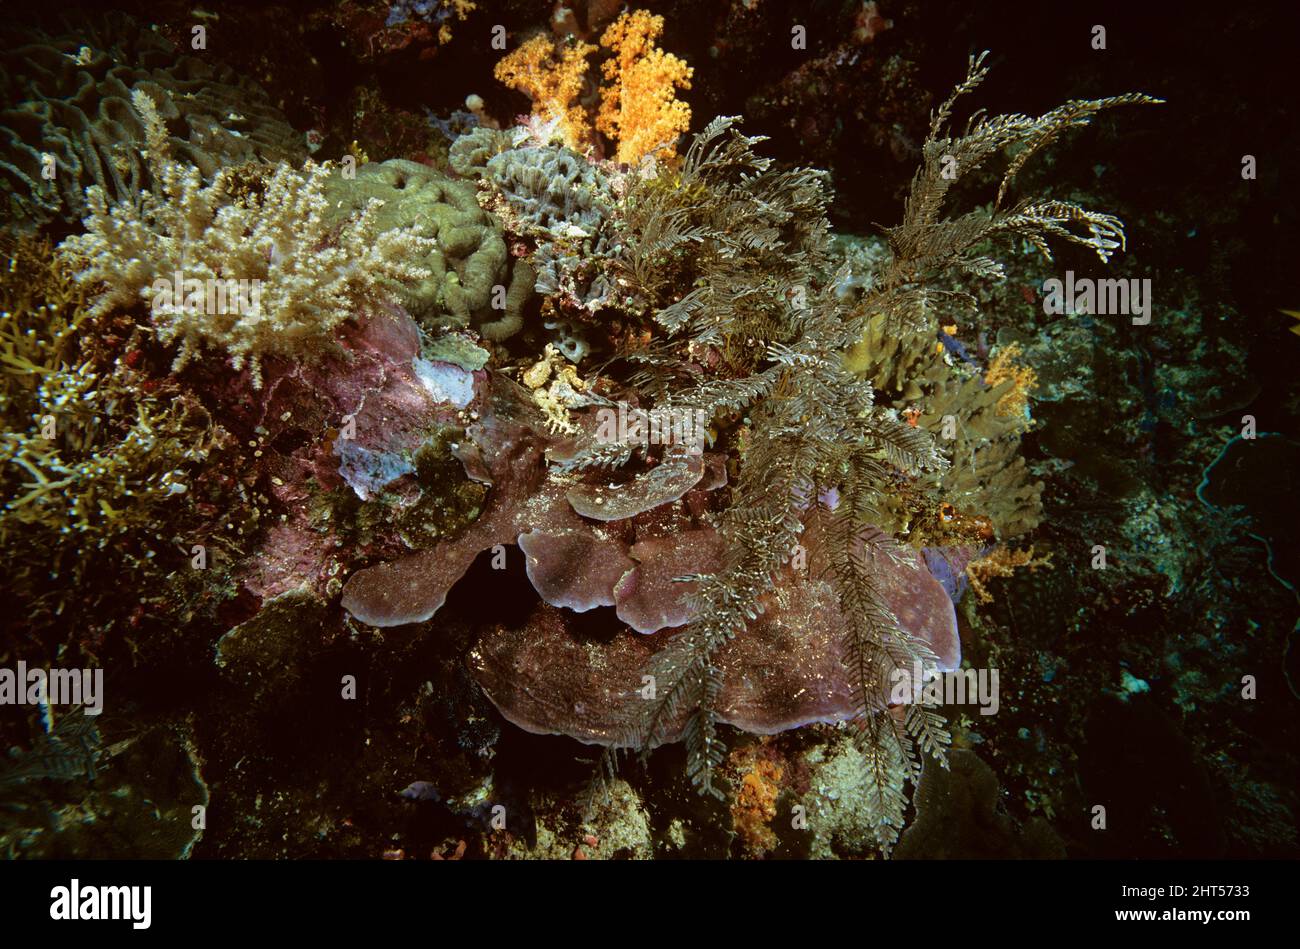 Feather stars, hydroids, orange soft corals and brown ‘Elephant ear’ sponges. Manado, Indonesia Stock Photo